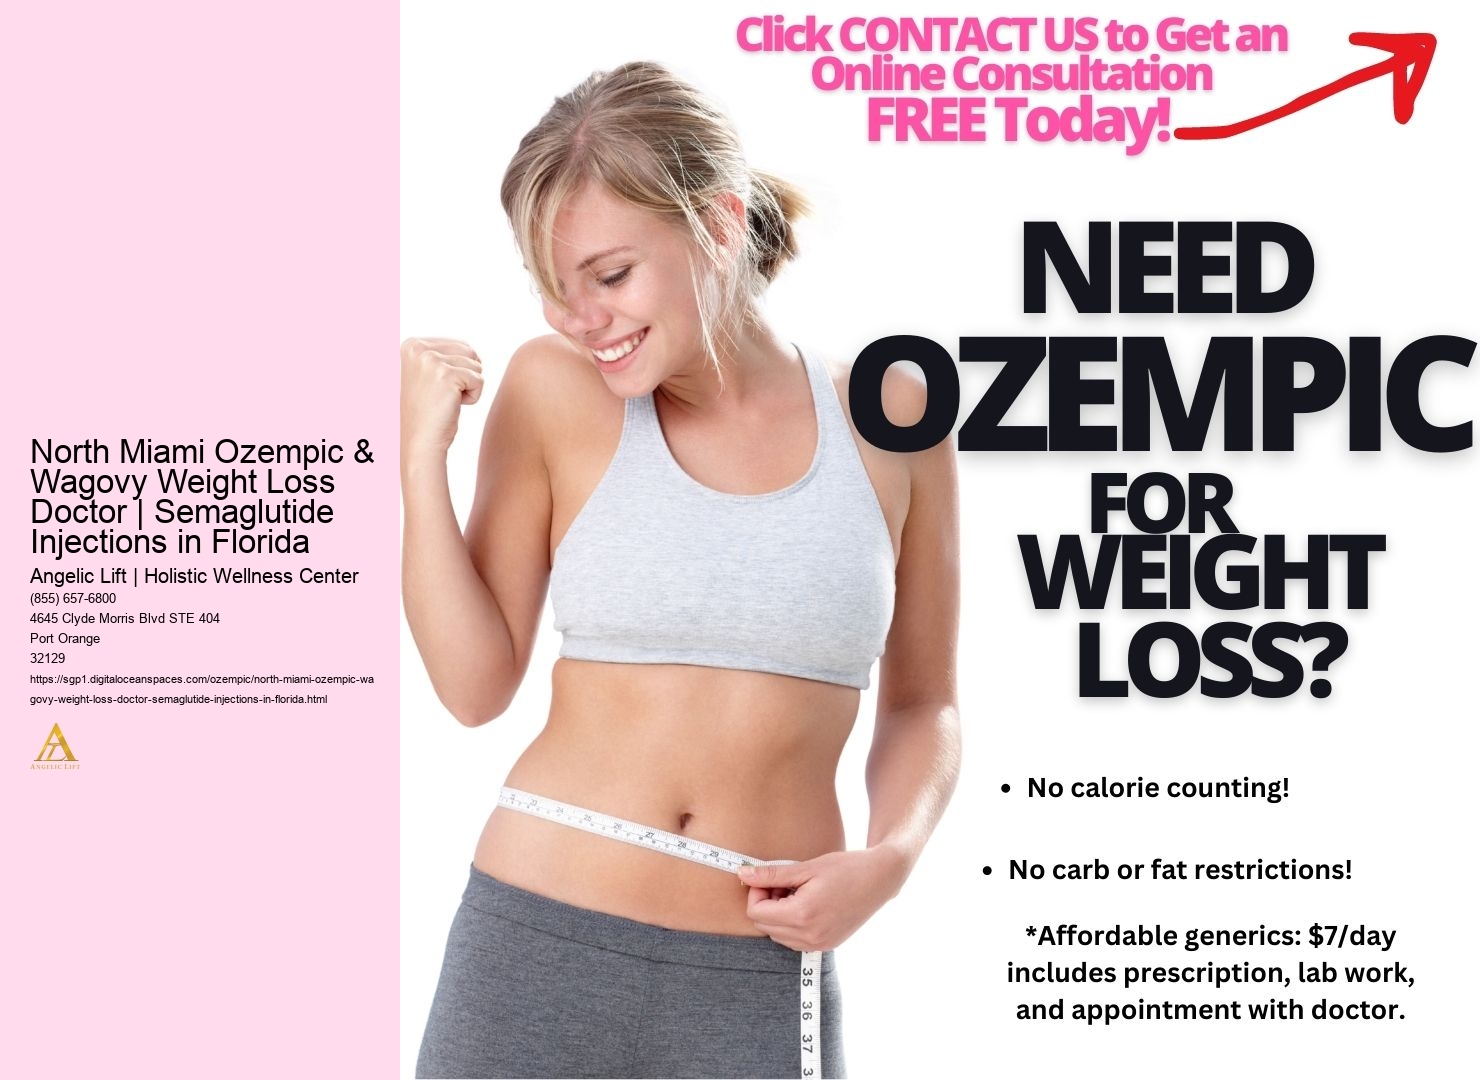 North Miami Ozempic & Wagovy Weight Loss Doctor | Semaglutide Injections in Florida